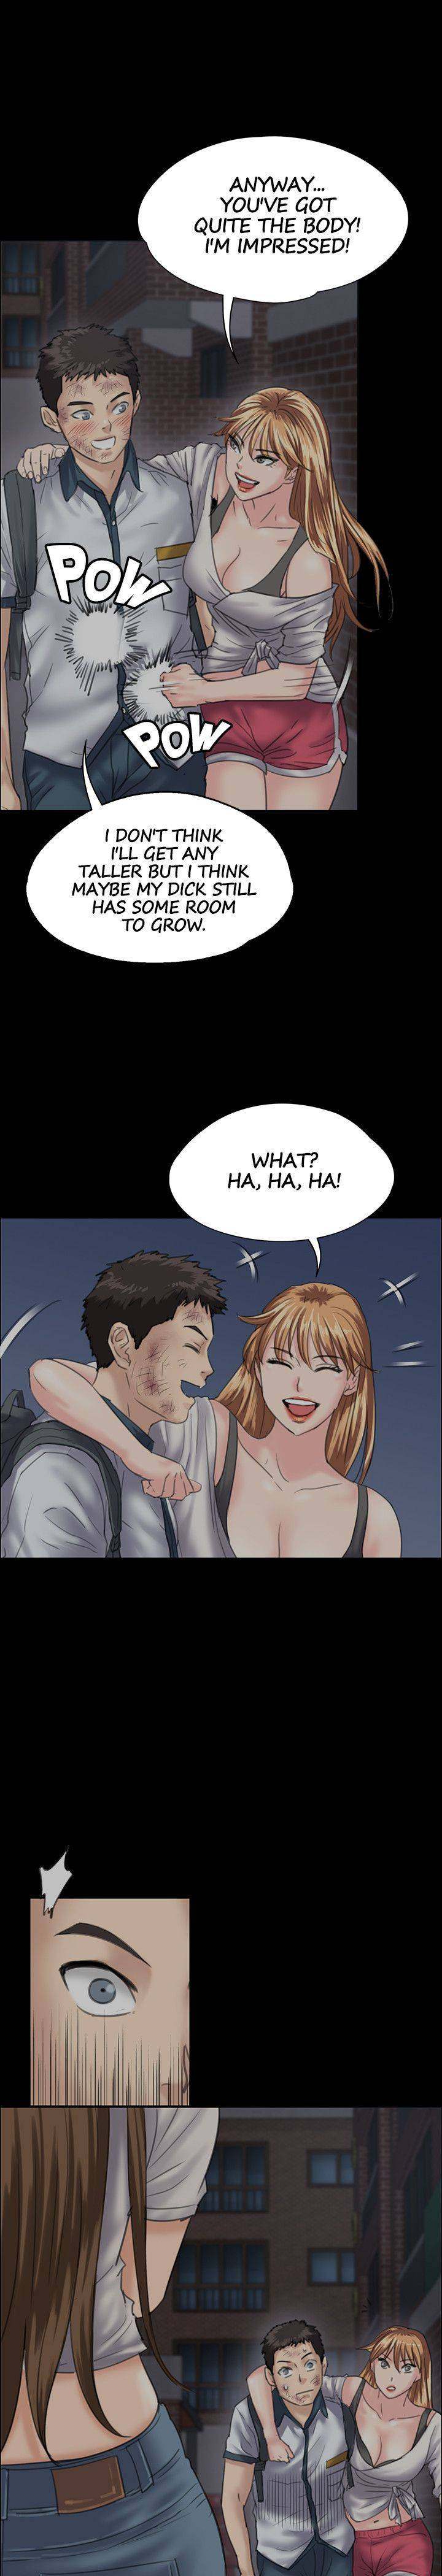 Panel Image 1 for chapter 30 of manhwa Queen Bee on read.oppai.stream